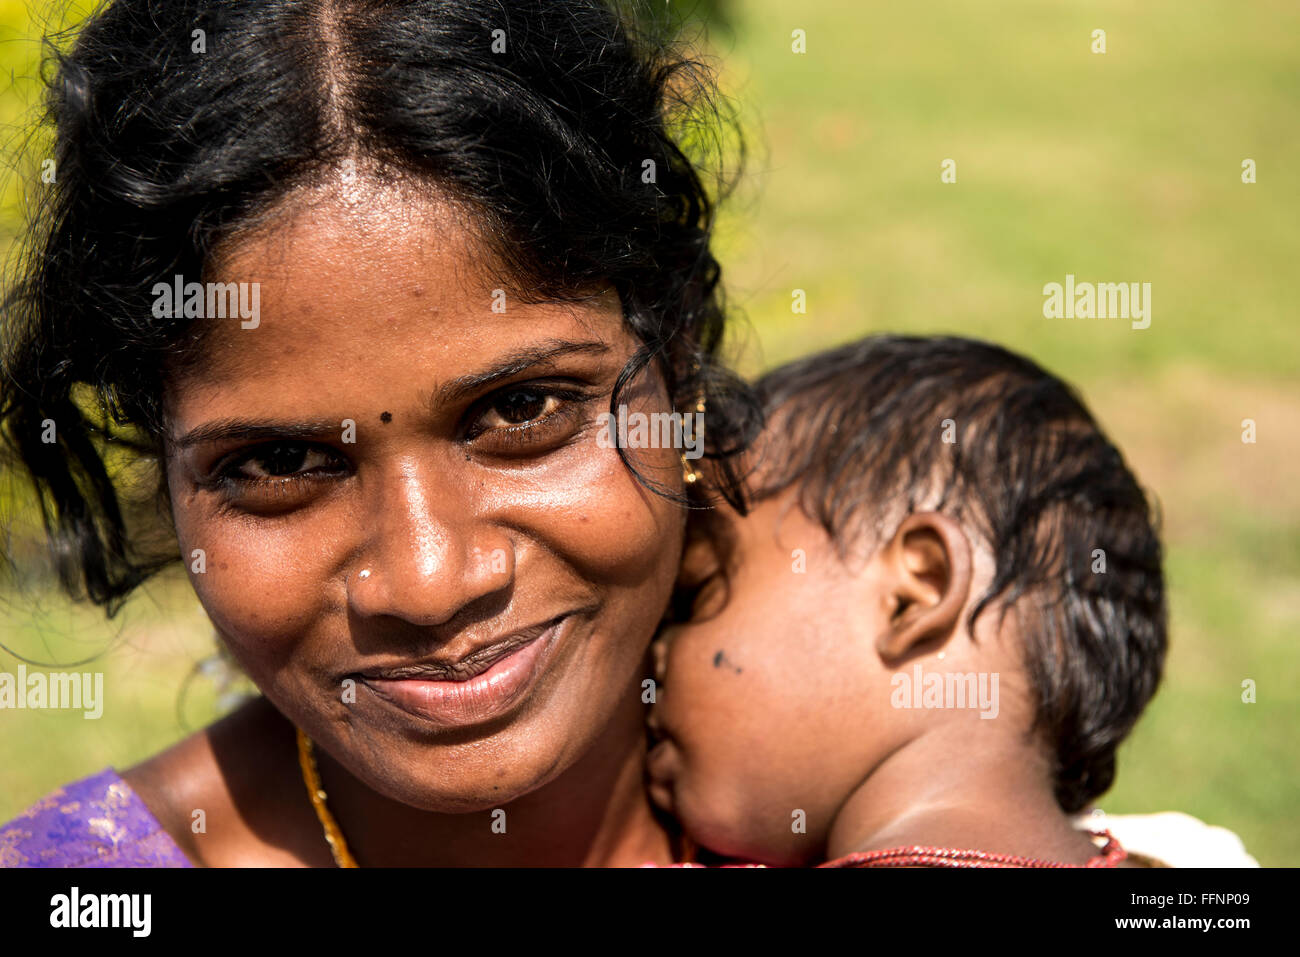 Indian woman with baby asleep on her shoulder in Tamil Nadu, India, Asia Stock Photo